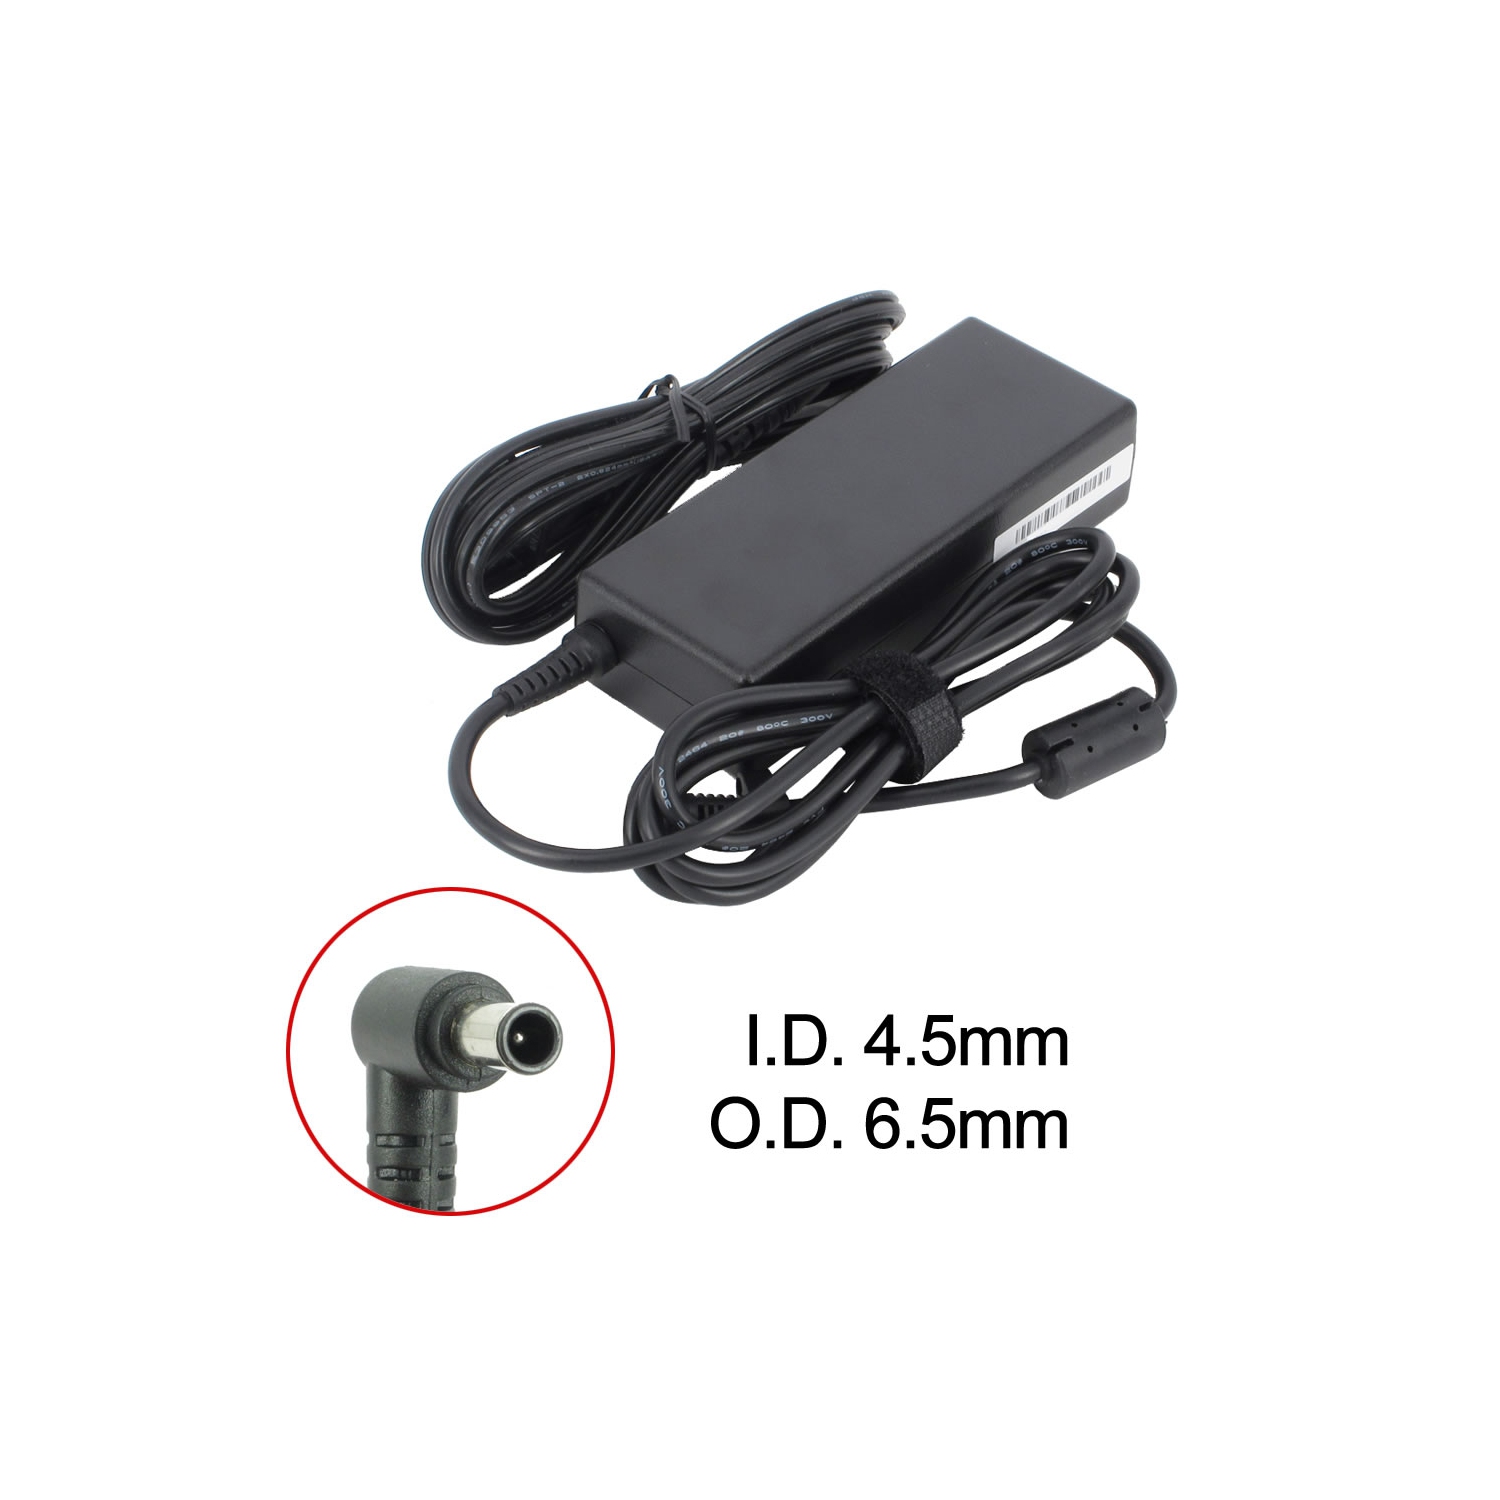 Brand New Laptop AC Adapter for LG XNOTE A520, ADP-90TH A, PCGA-AC19V19, VGP-AC19V14, VGP-AC19V26, VGP-AC19V43